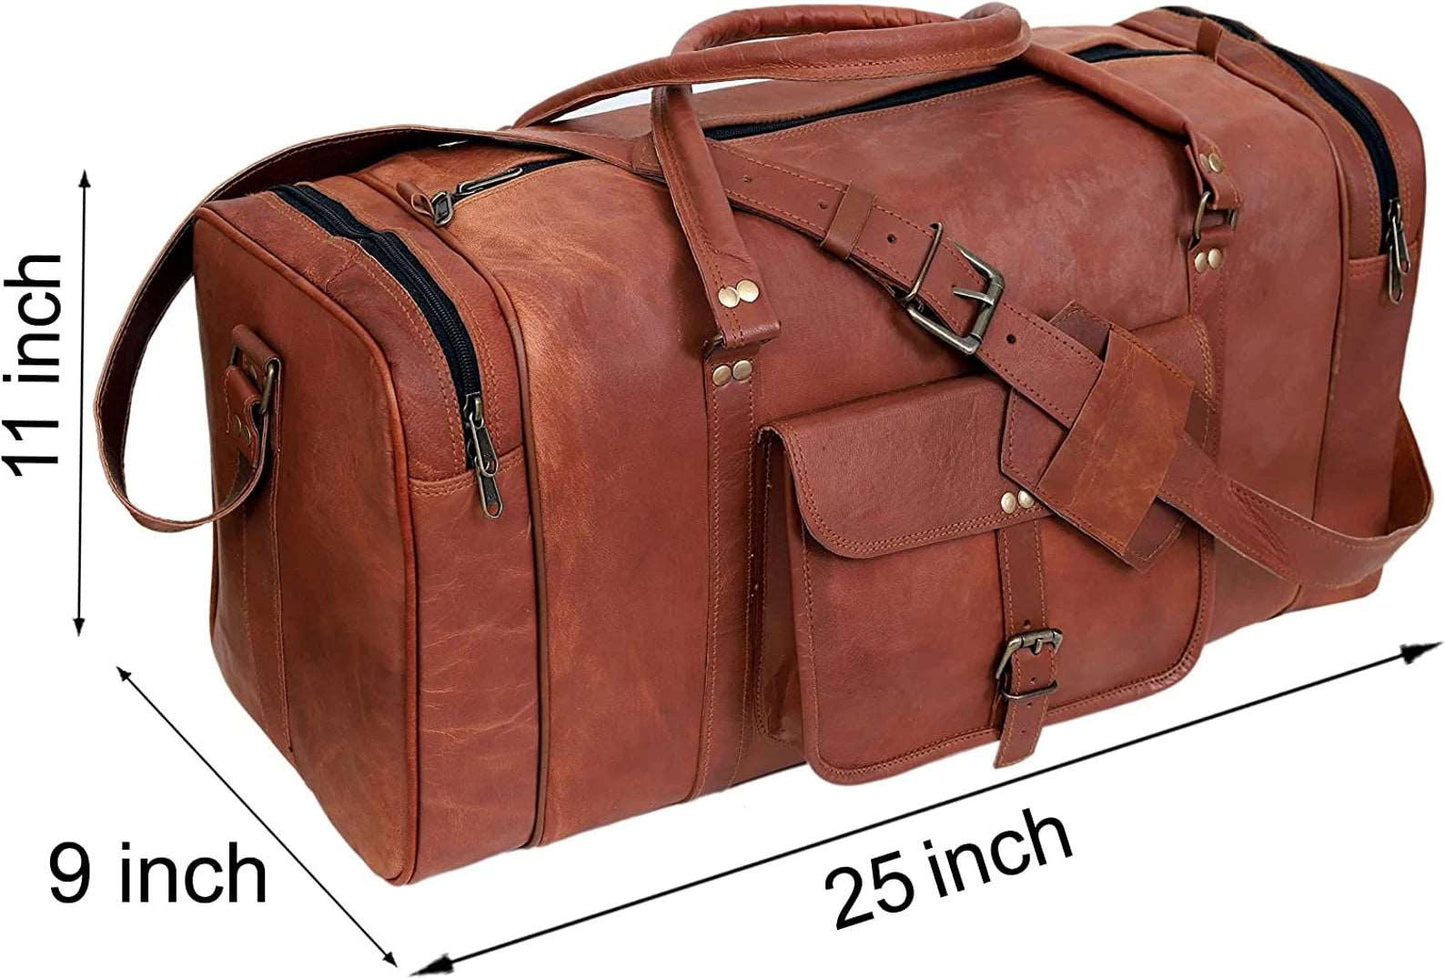 25 Inch Genuine Leather Duffel Travel Overnight Weekend Leather Bag Sports Gym Duffel Luggage Travel Cabin Gym Yoga Bag For Men And Women